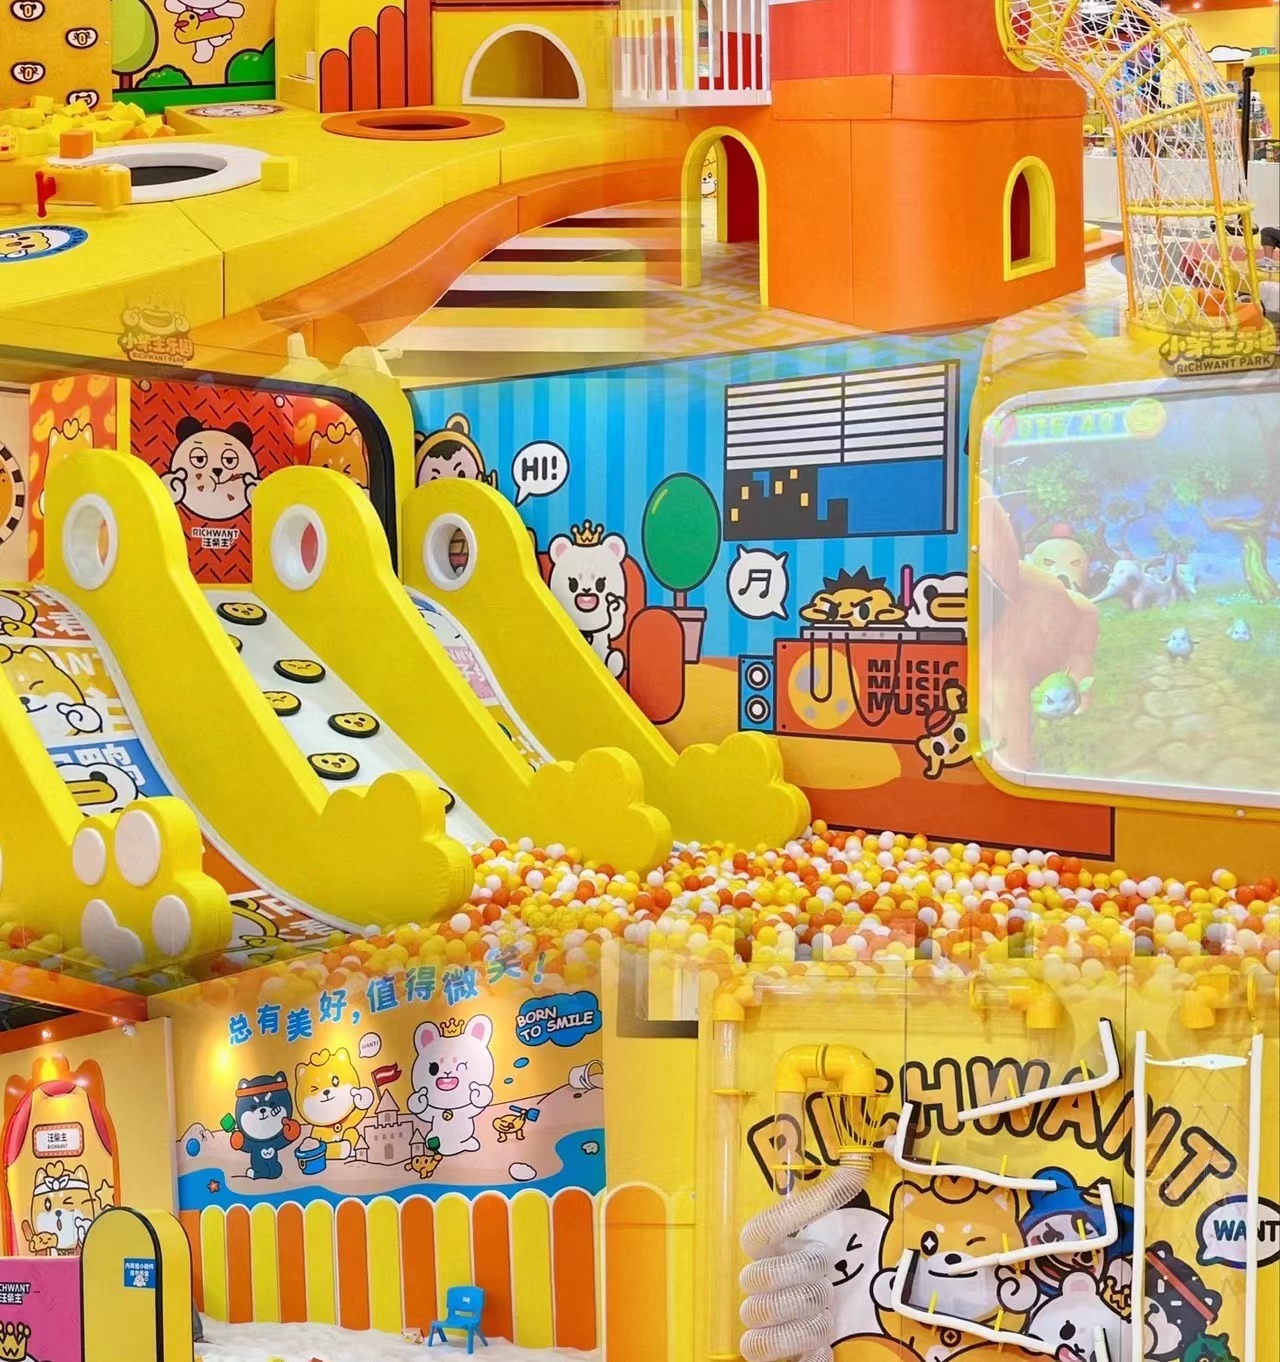 How much is it to open an indoor playground?